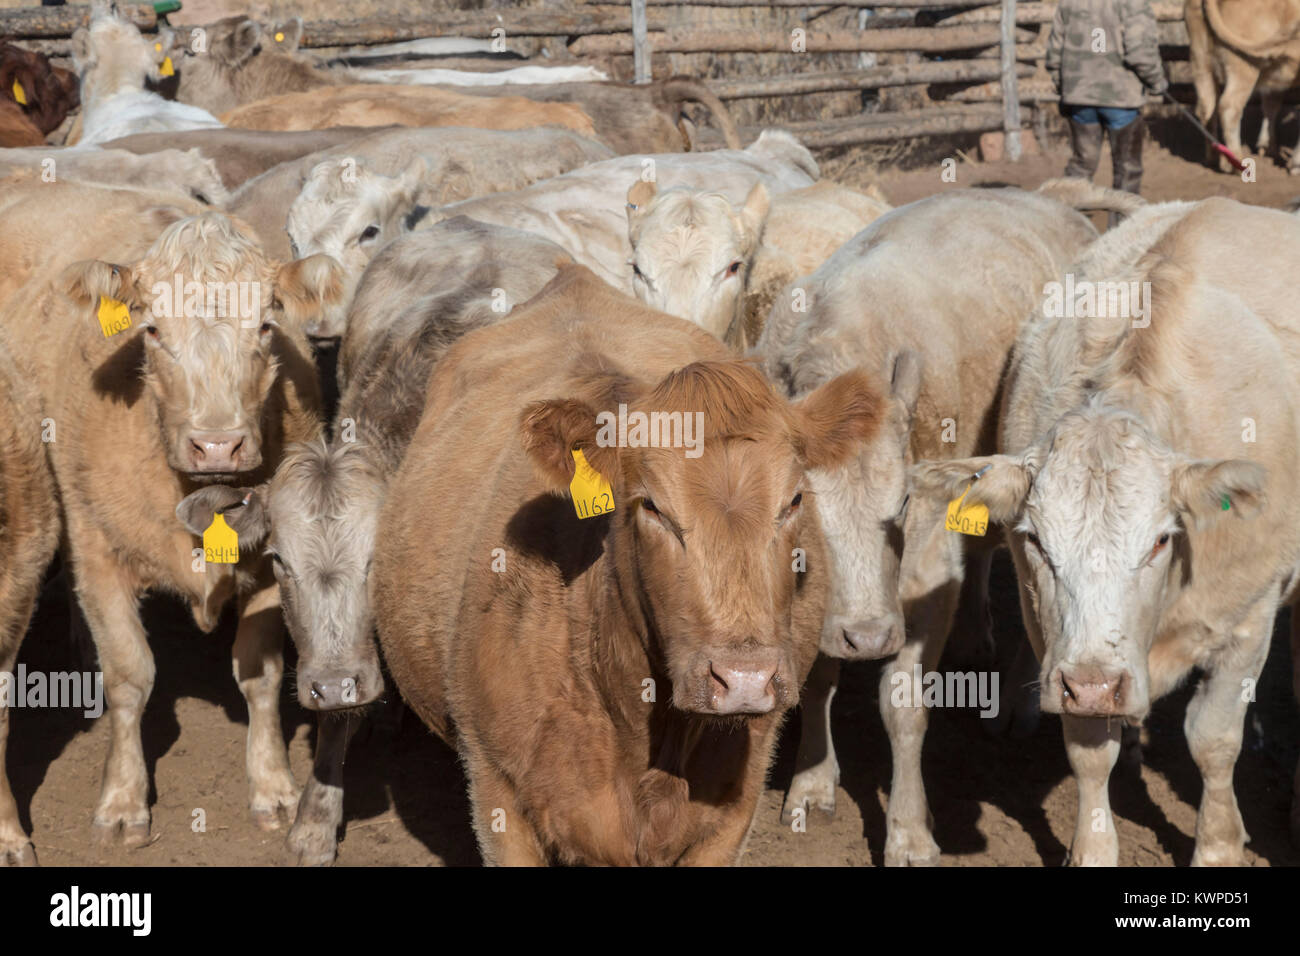 Whitewater, Colorado - Cattle, mostly Charolais, that they have been rounded up from a grazing allotment on BLM land. Stock Photo